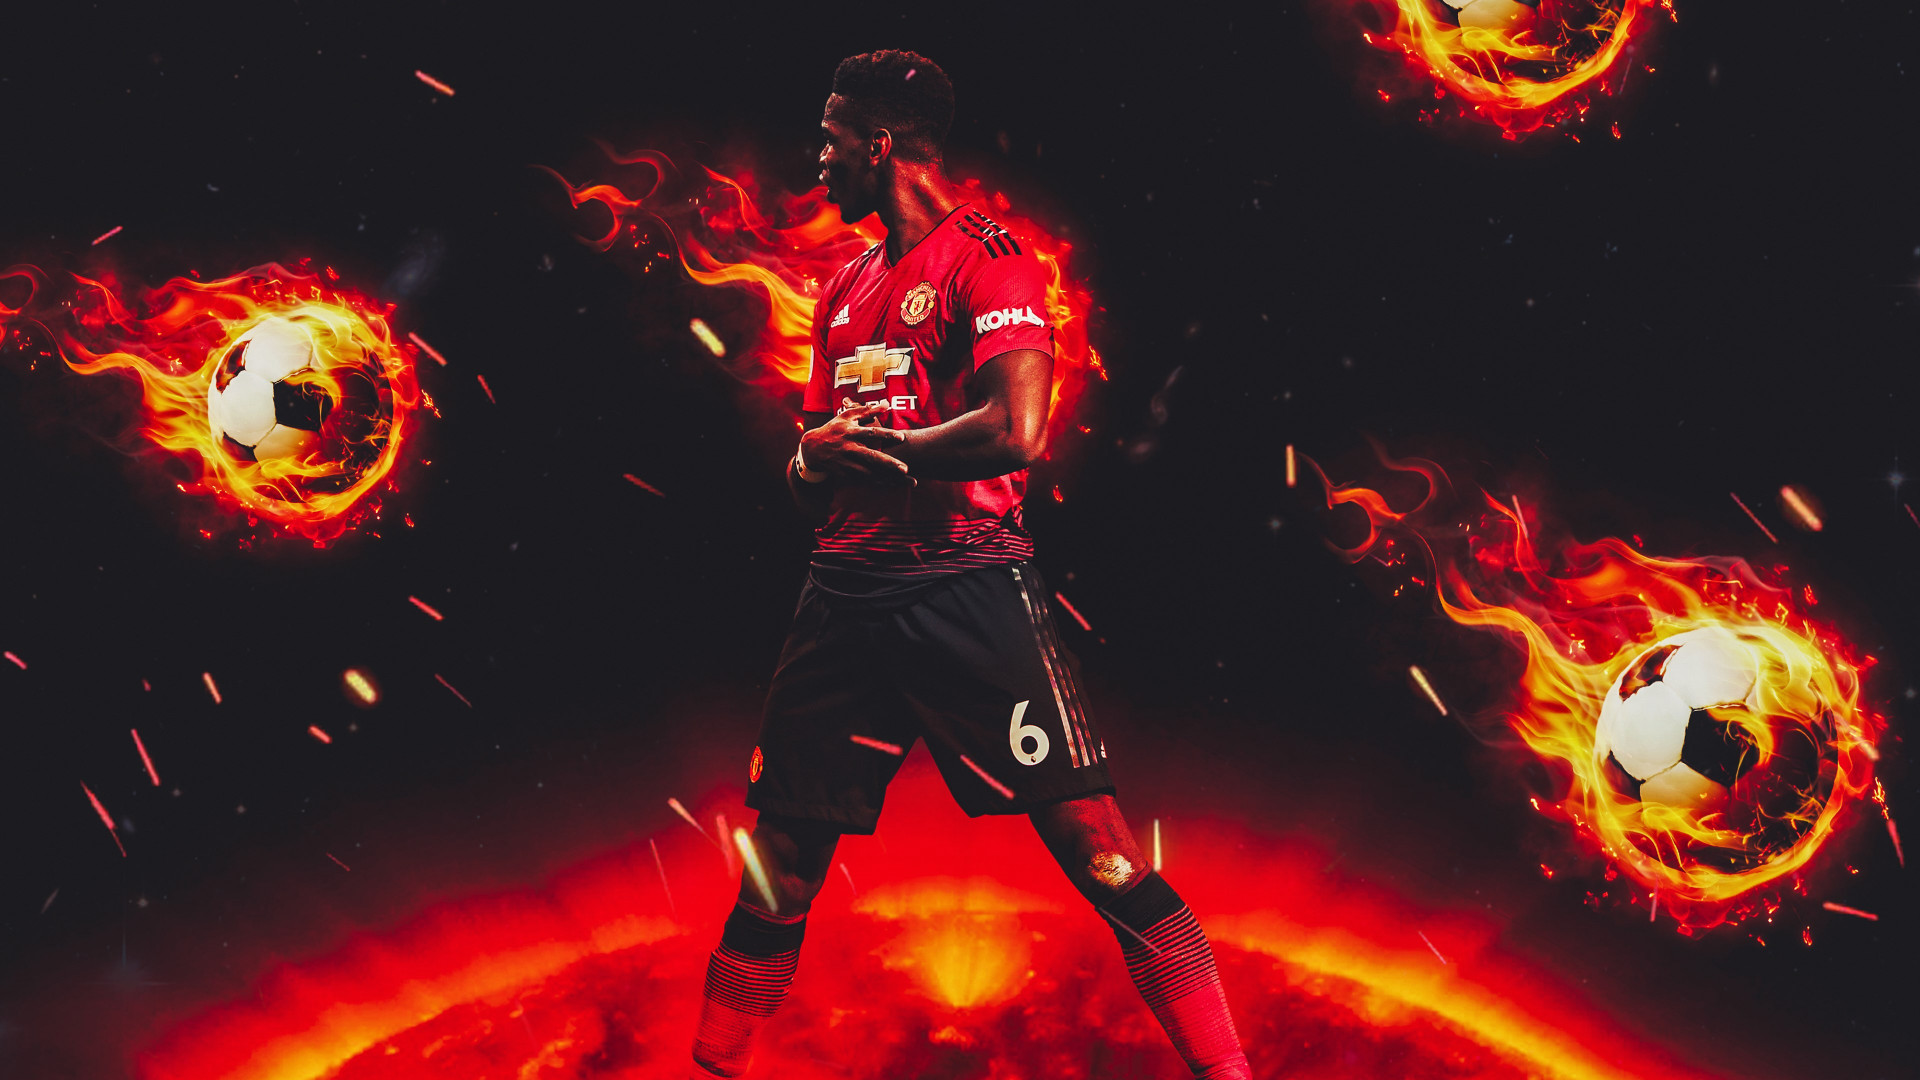 Paul Pogba for Manchester United wallpaper 1920x1080